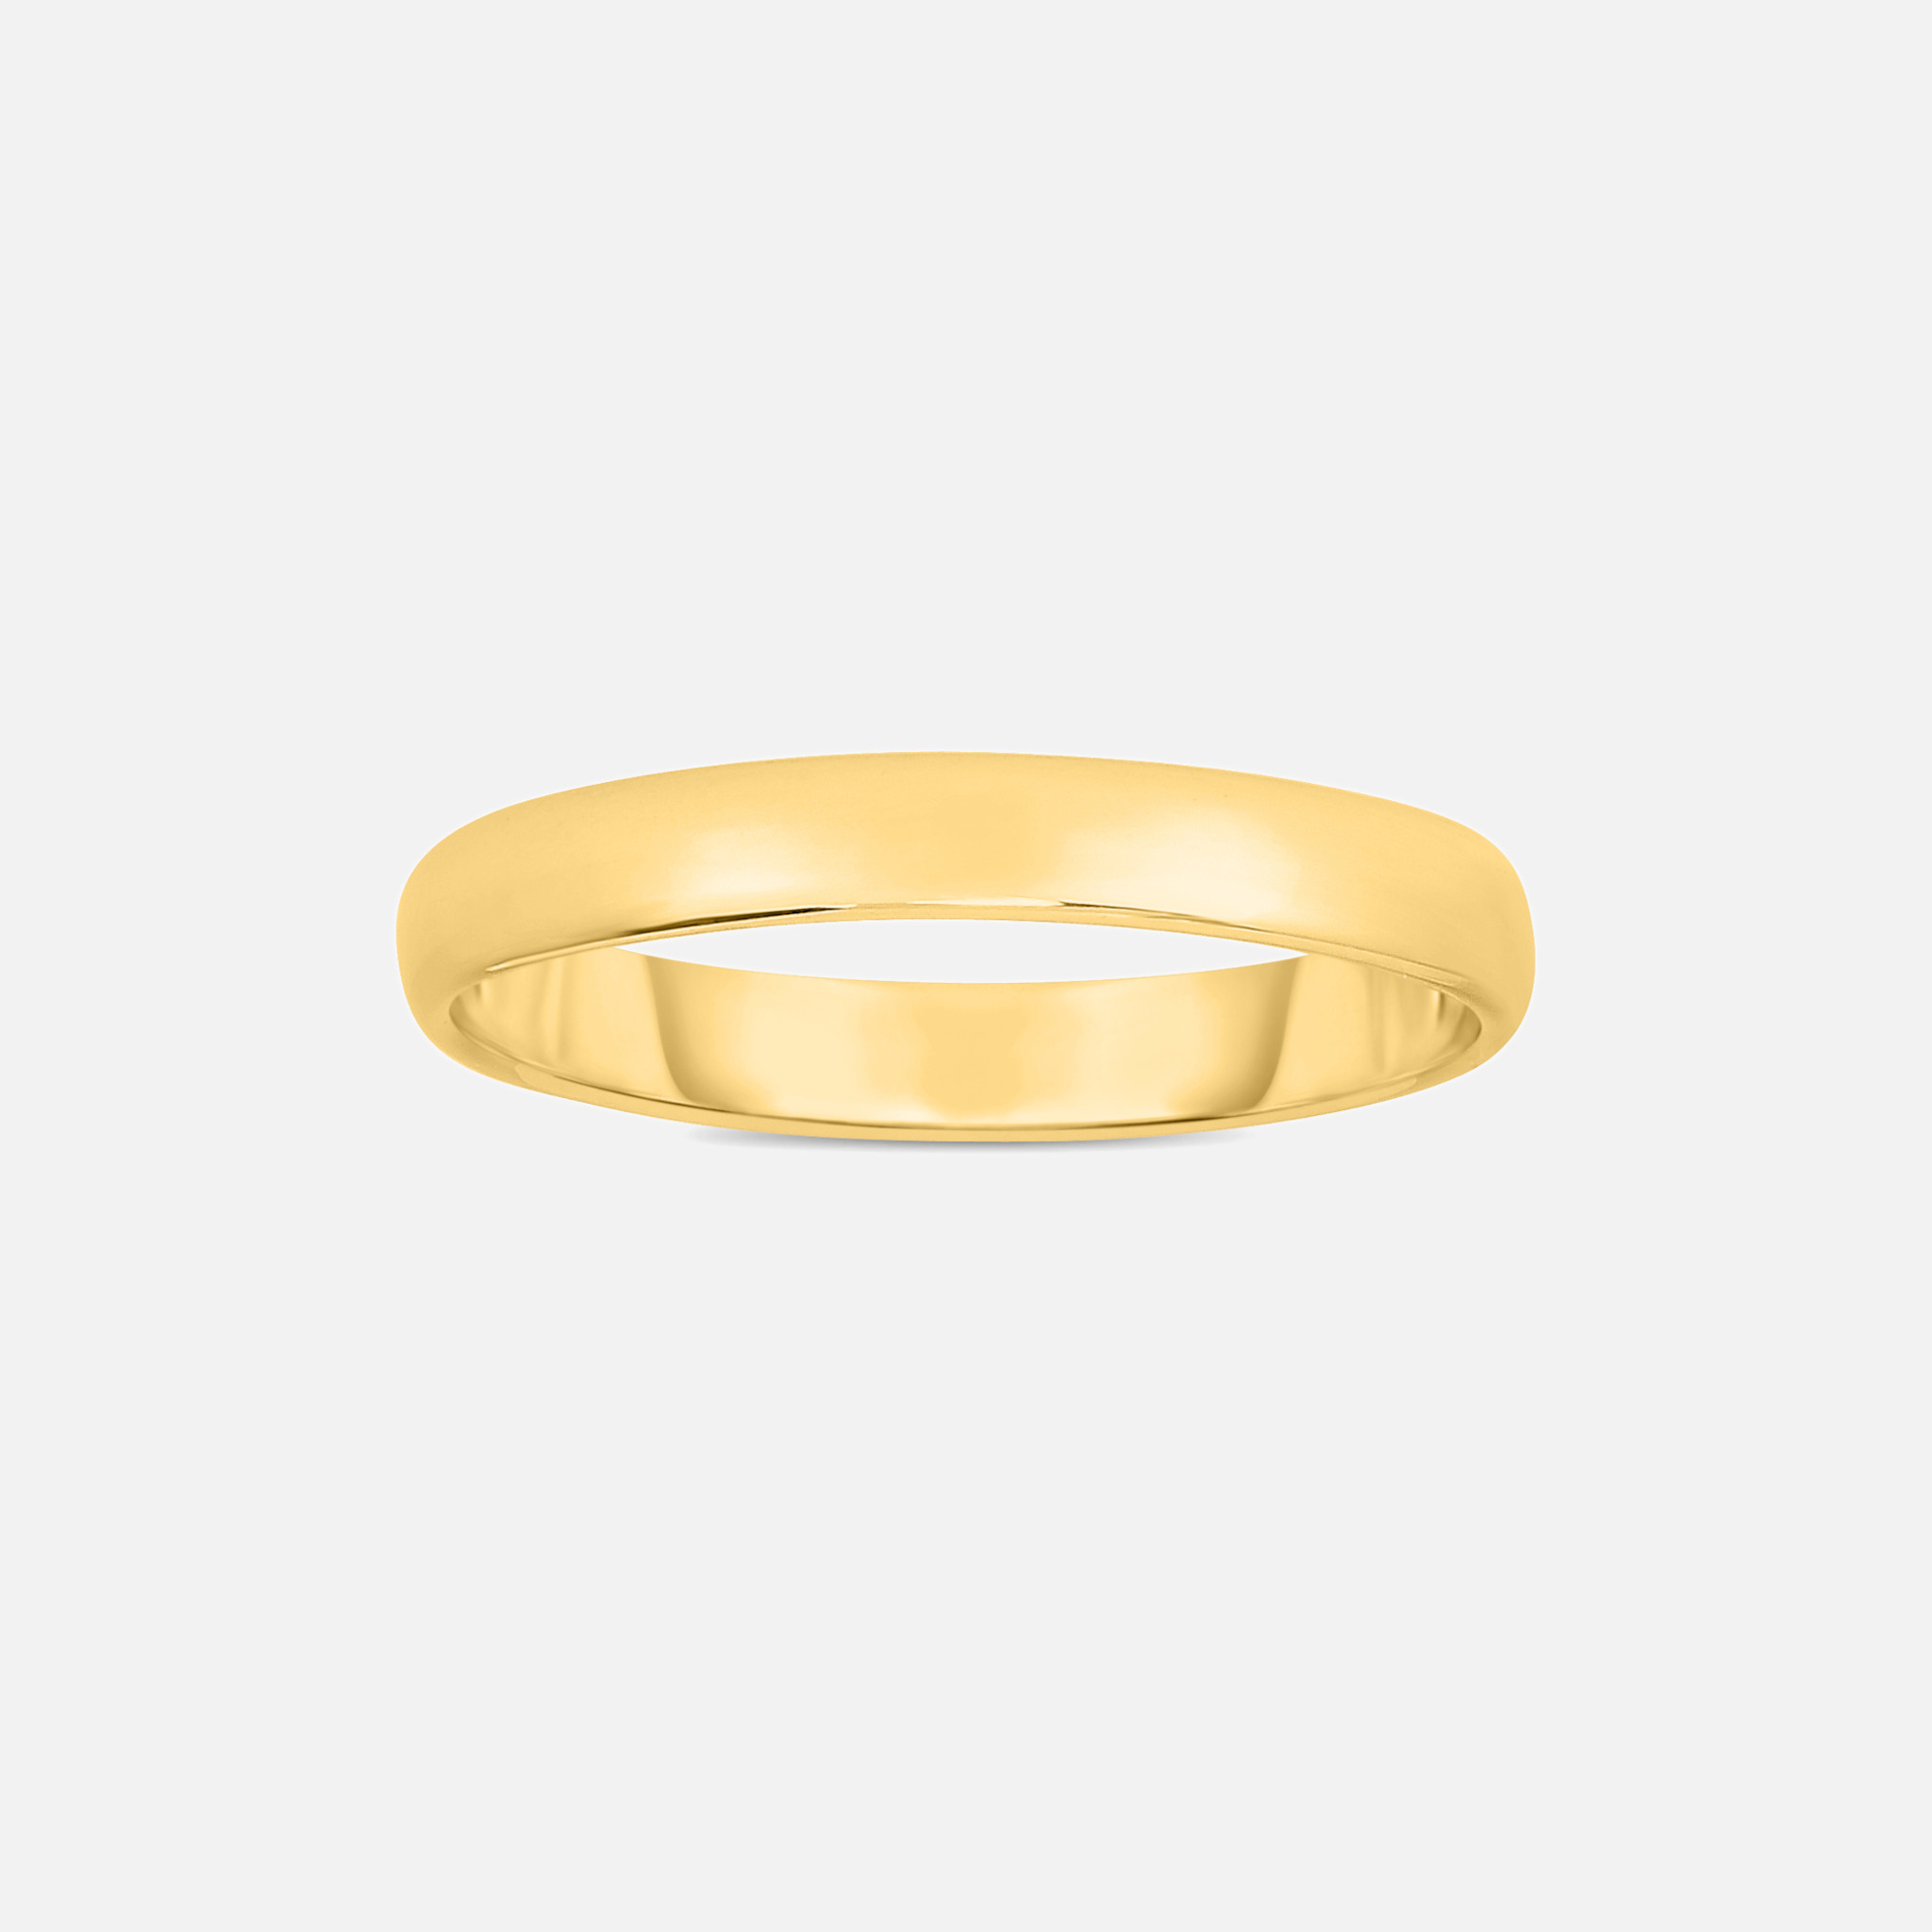 This thin gold wedding band will give any special moment a cool, contemporary edge.